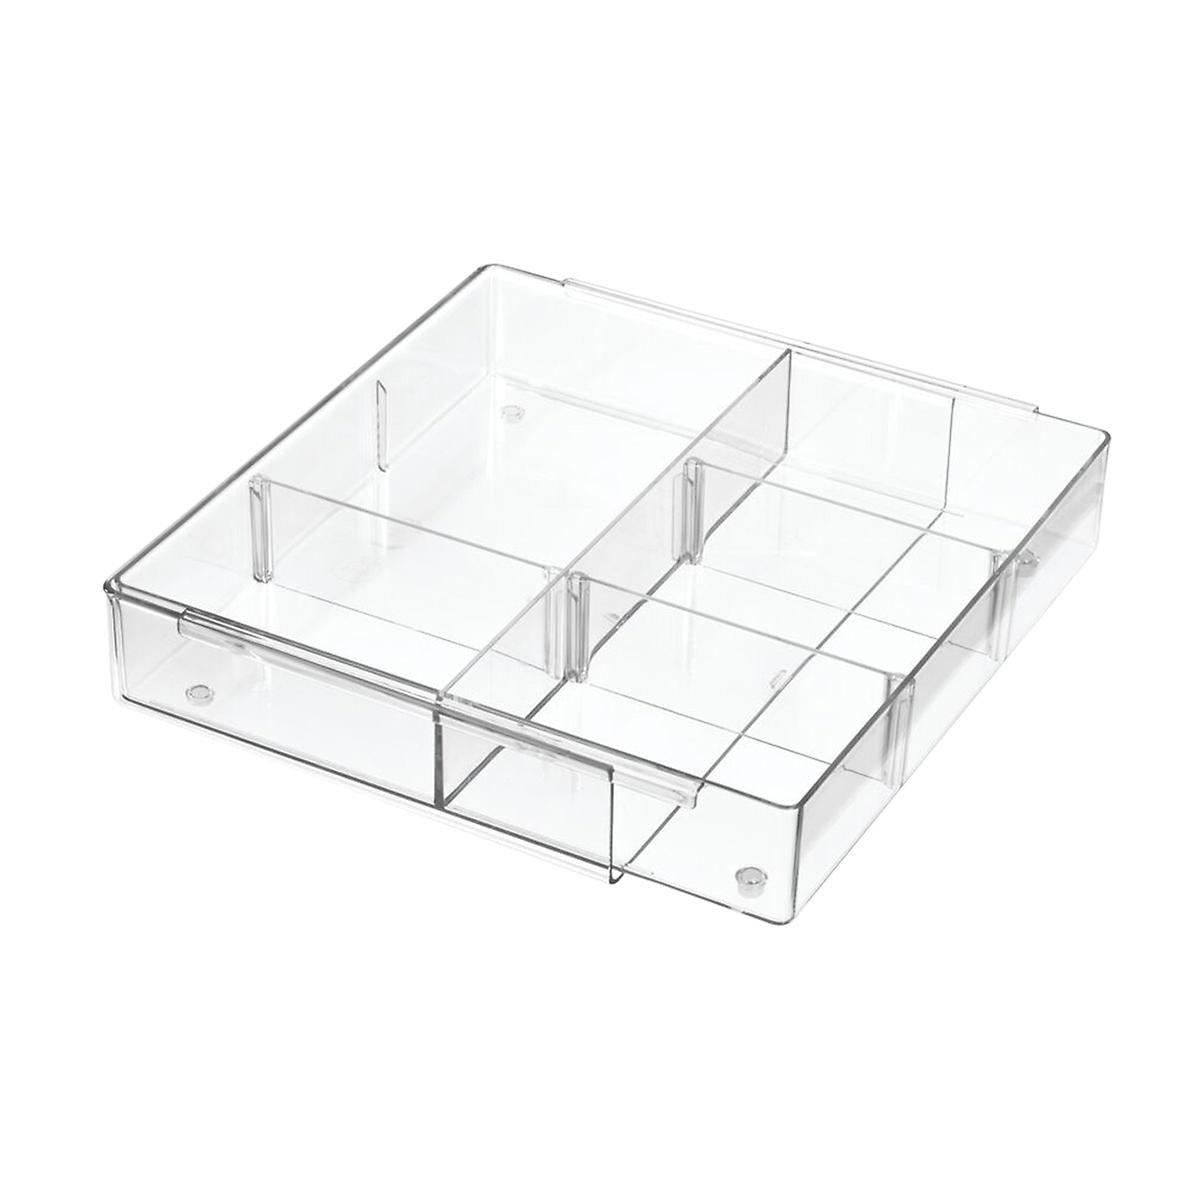 THE Expandable Drawer Organizer